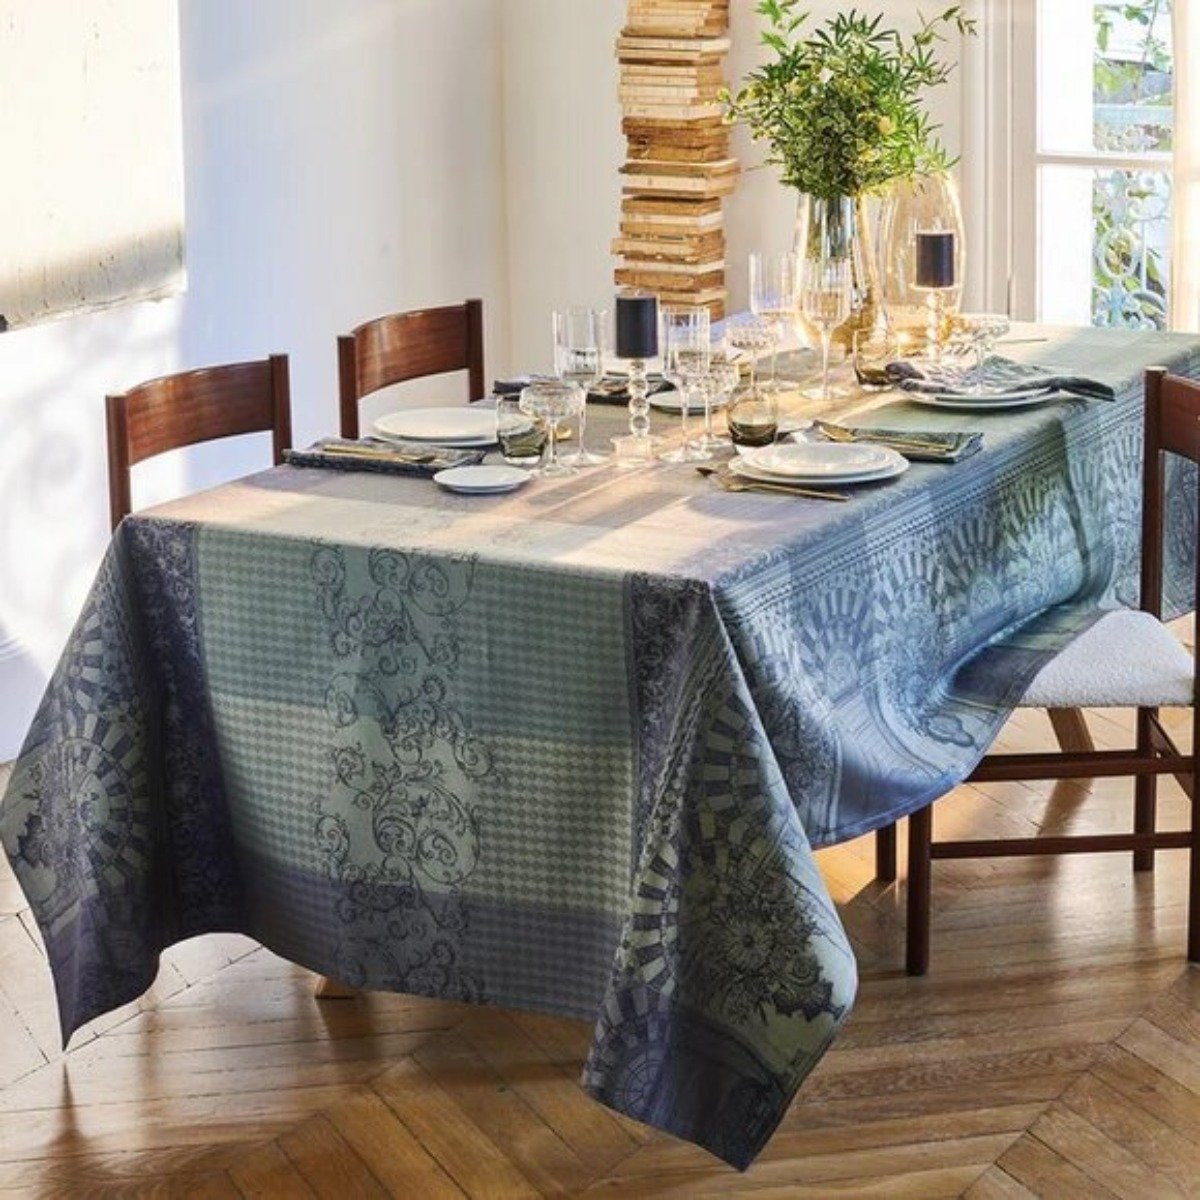 Housewares - decorated table with linens and kitchenware